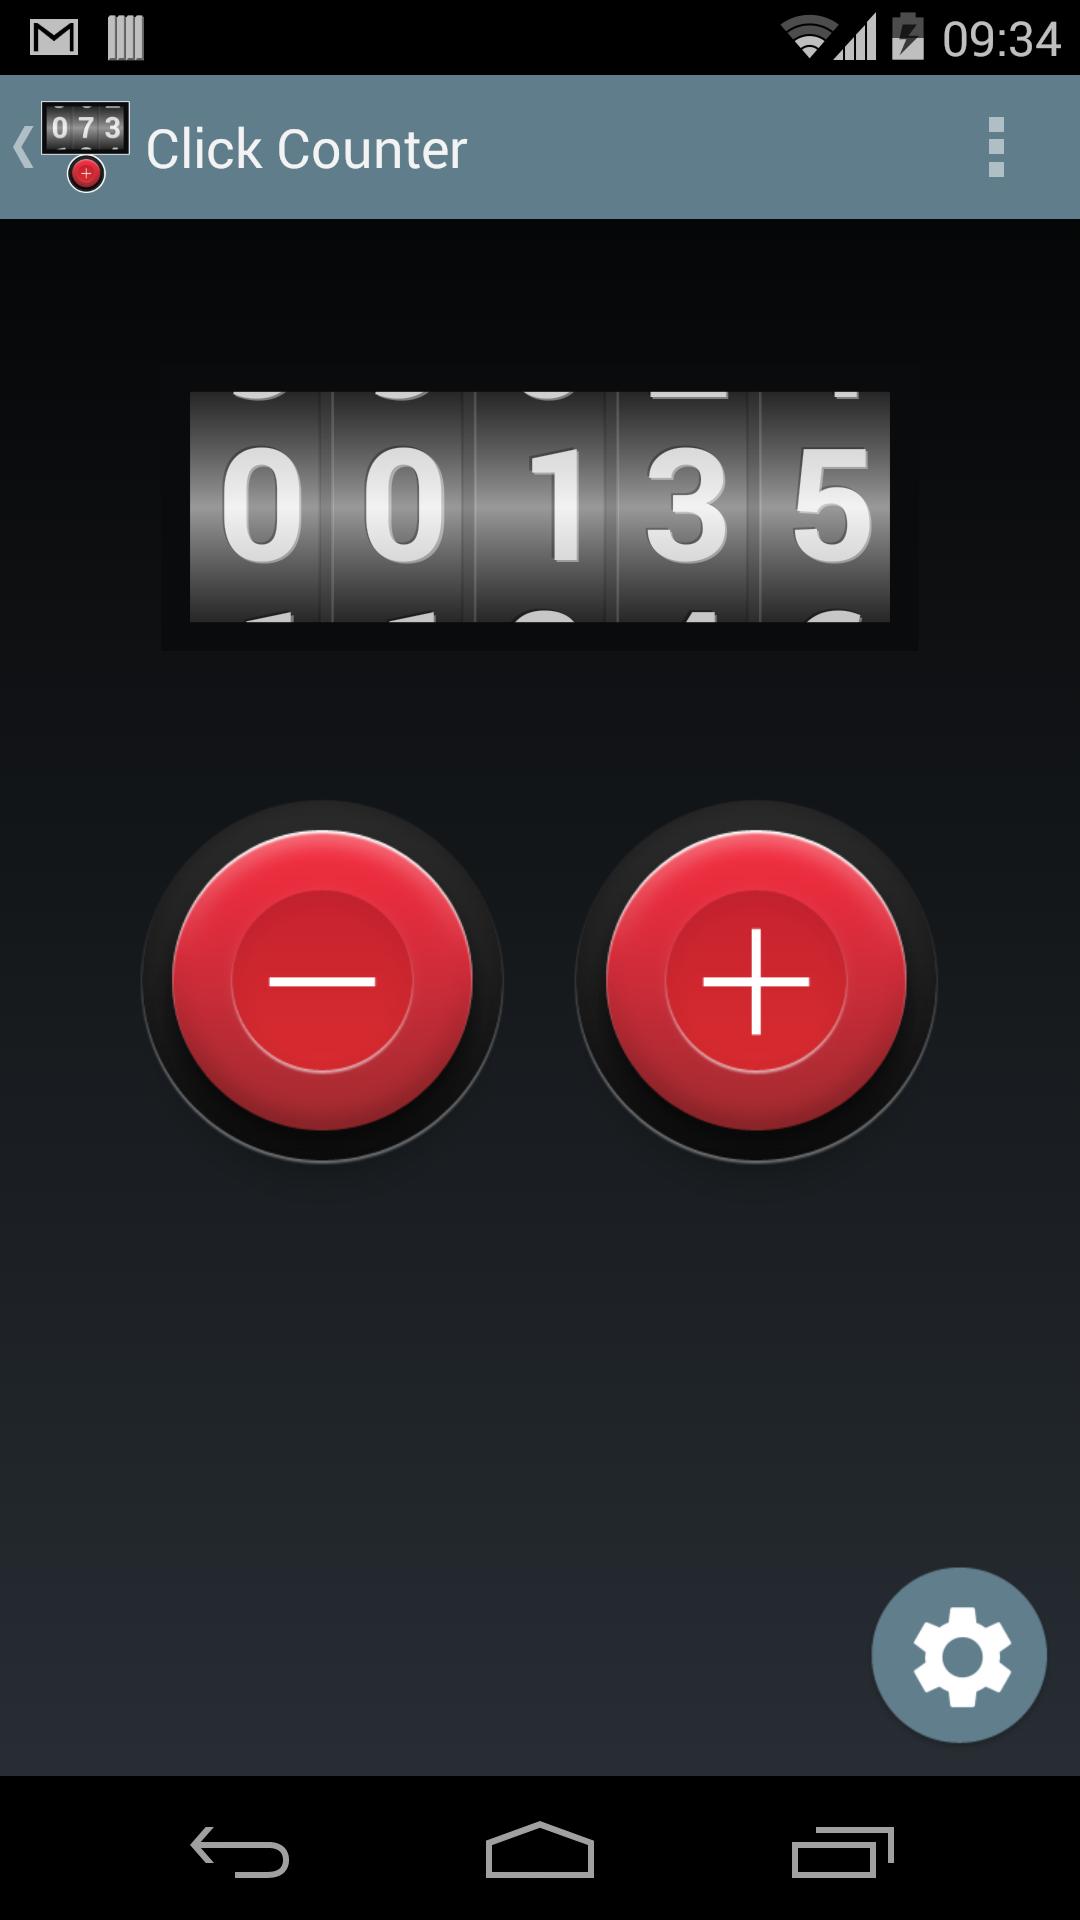 Click Counter for Android - APK Download